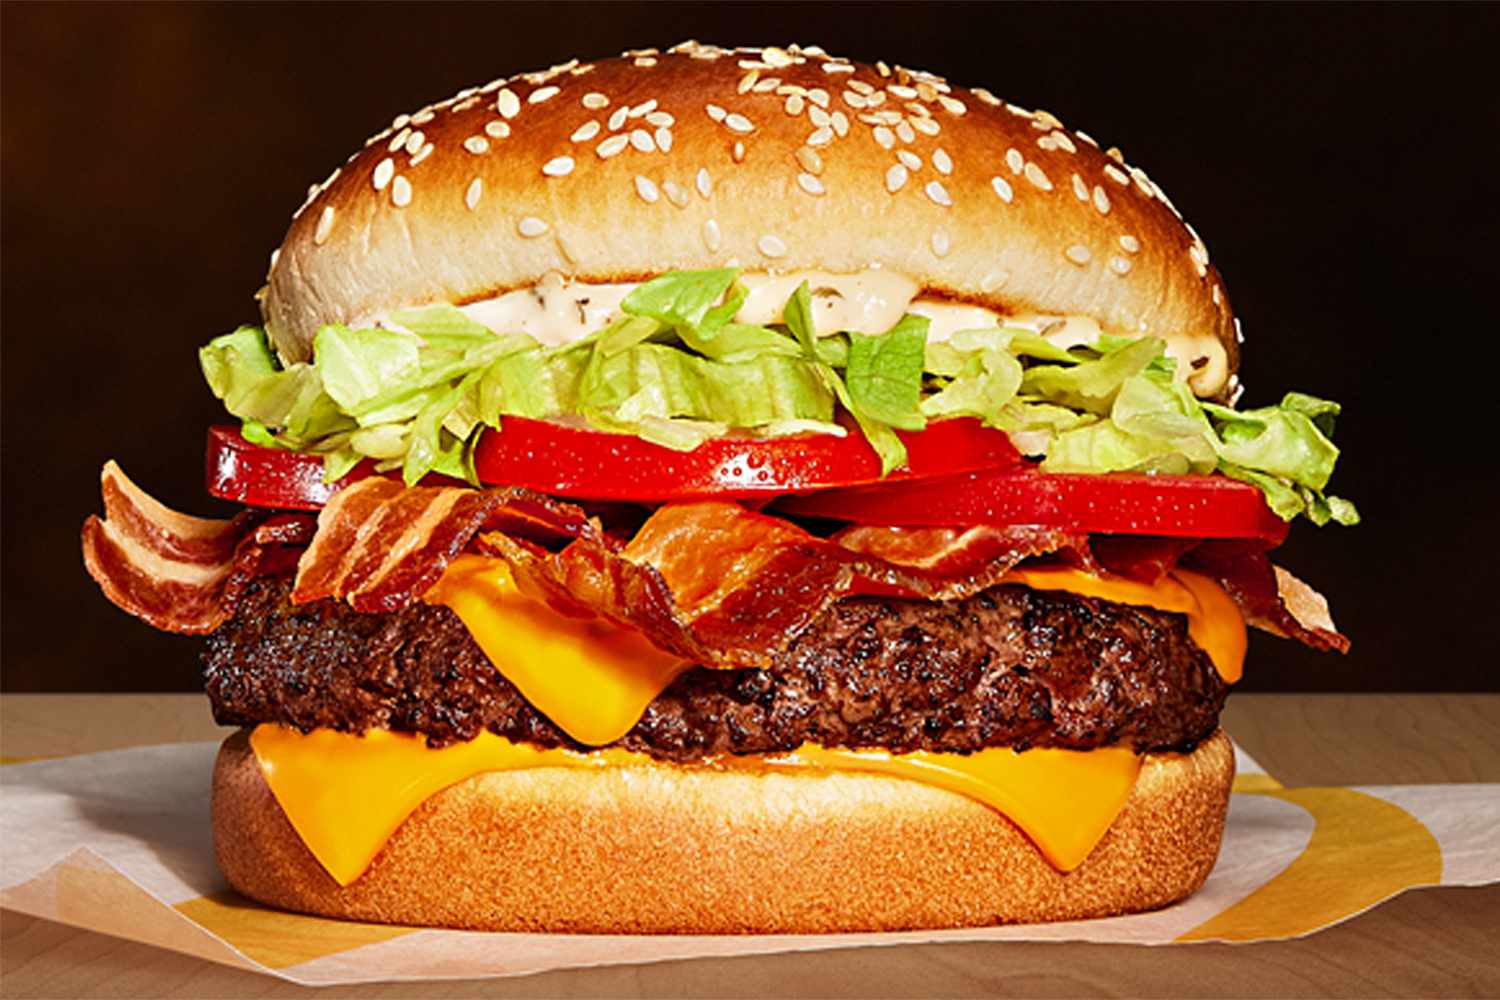 McDonald's Brings Back Smoky BLT Quarter Pounders Along with New McFlurry Flavor